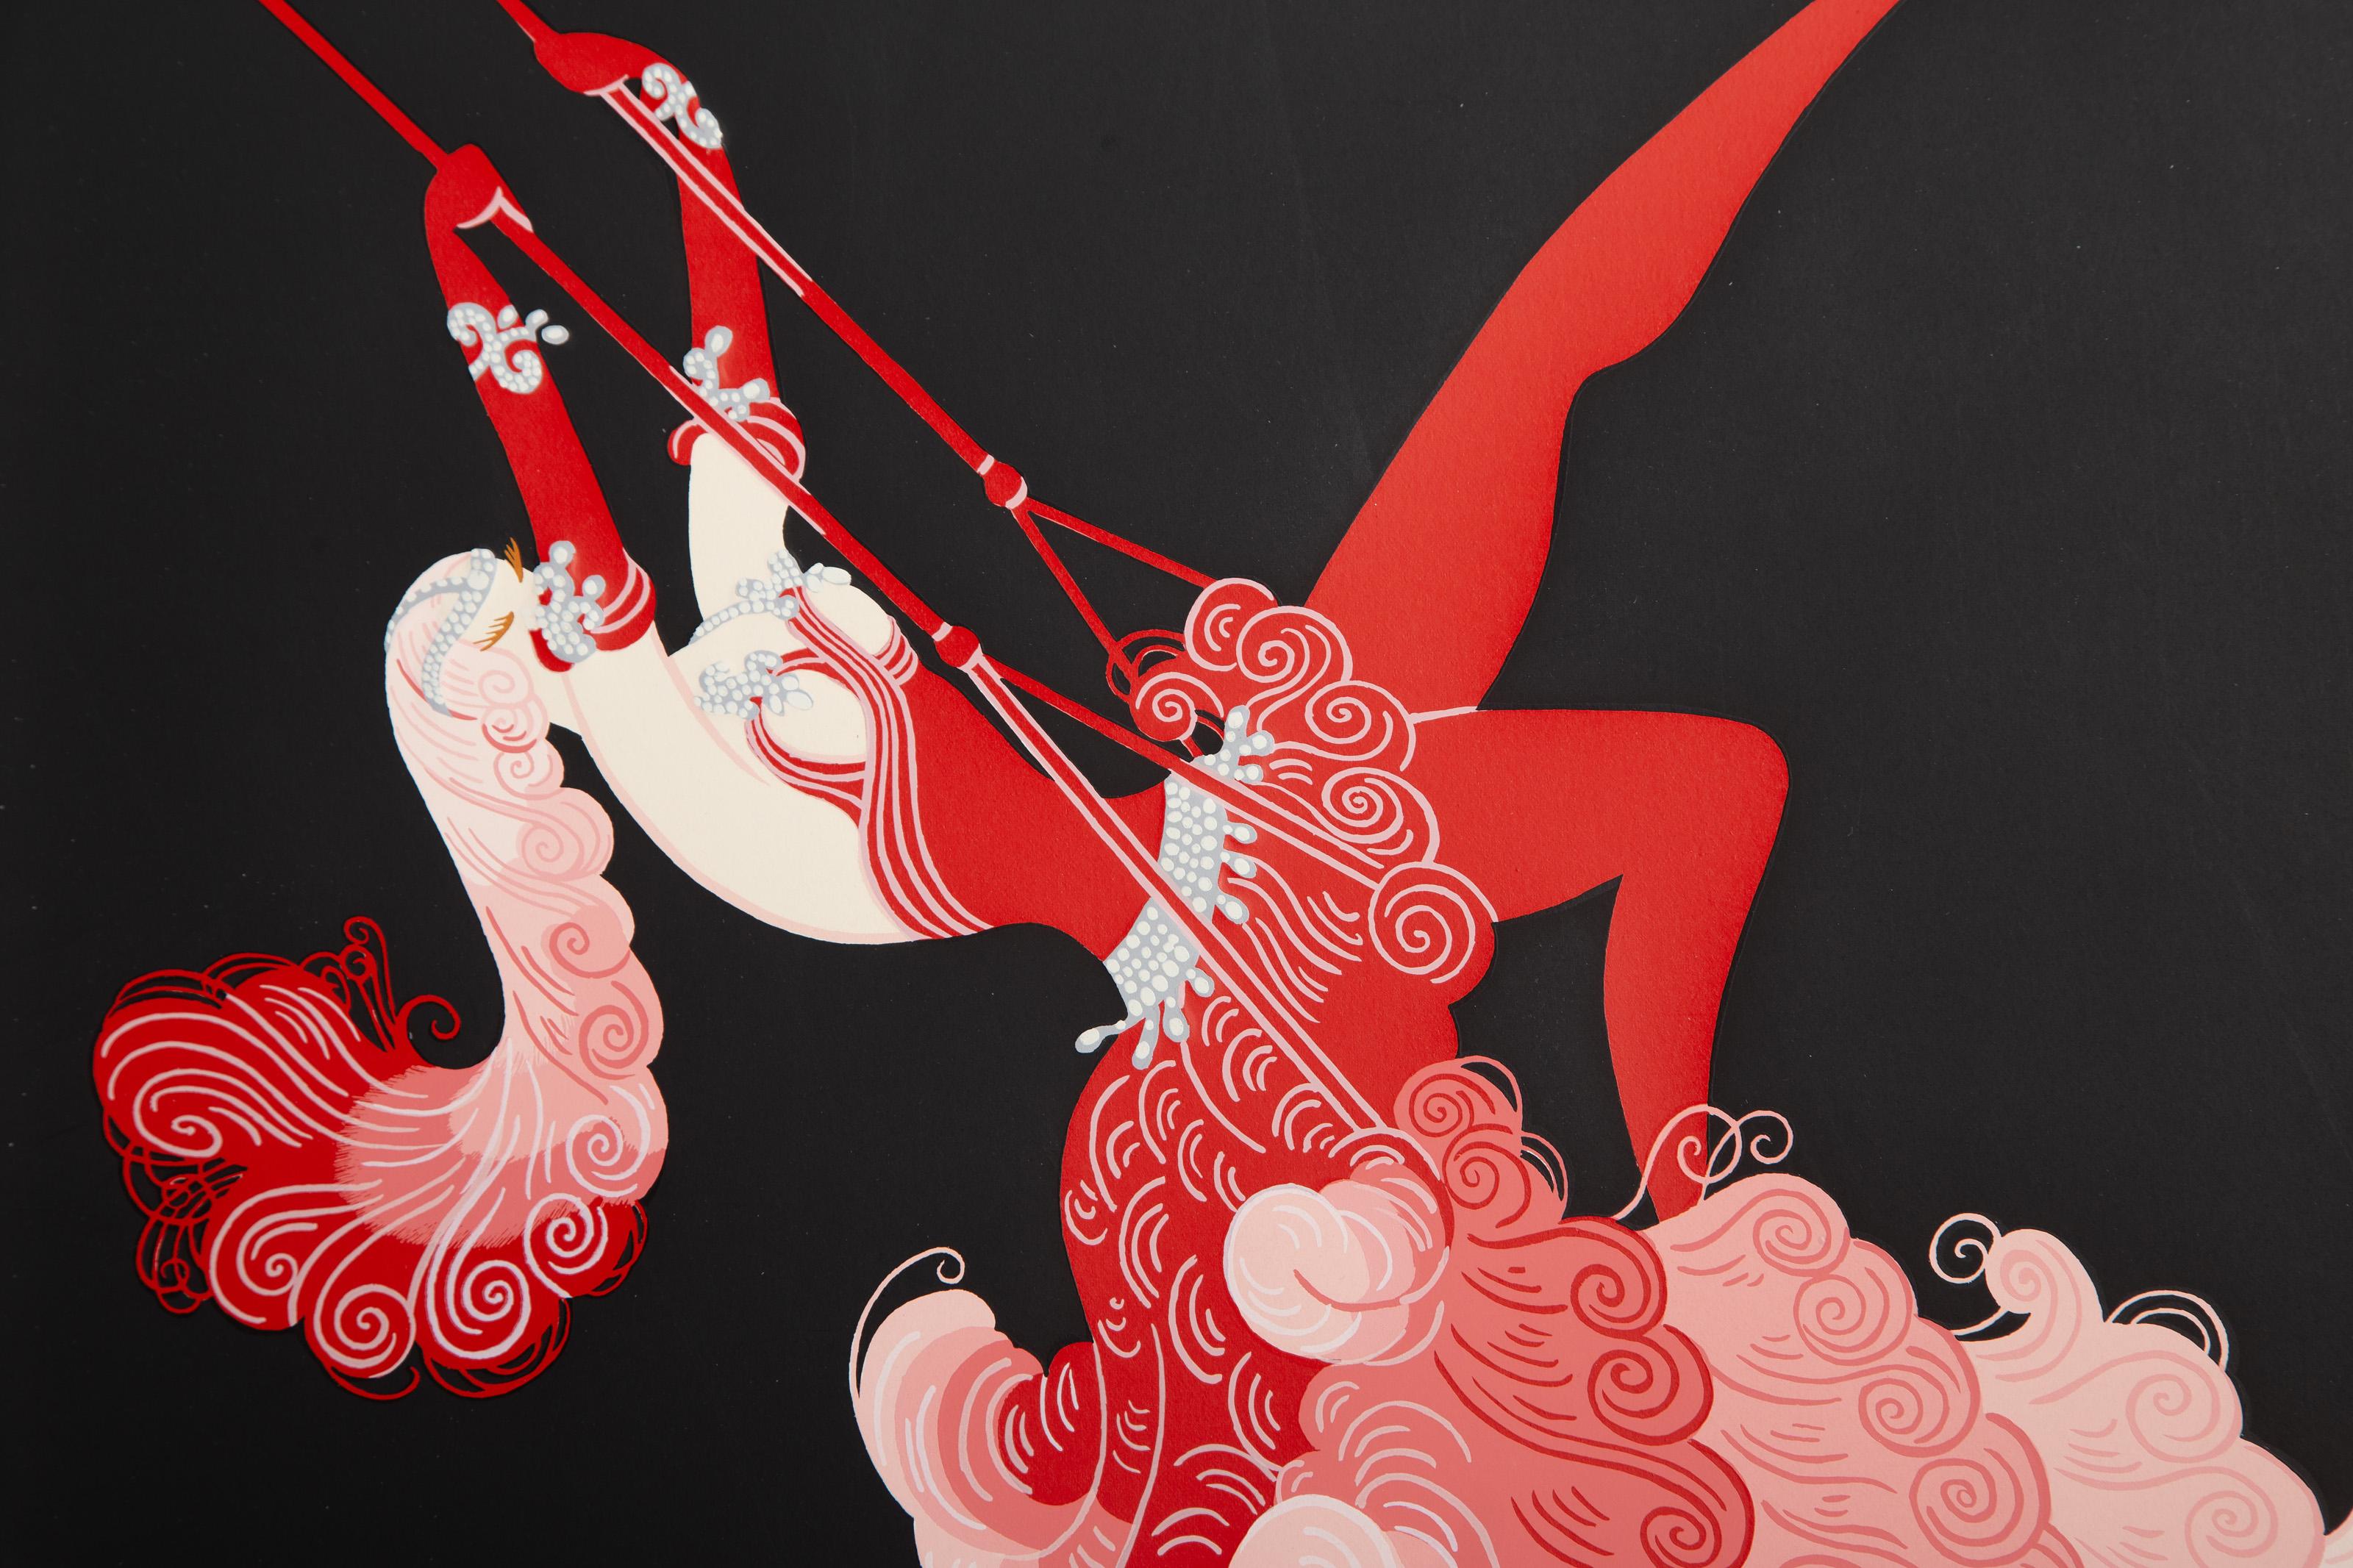  Erte, Russian (1892 - 1990) - Trapeze Artist, Year: 1983, Medium: Screenprint on Arches, signed and numbered in pencil, Edition: AP, Image Size: 21.75 x 16.75 inches, Size: 30 x 22 in. (76.2 x 55.88 cm)